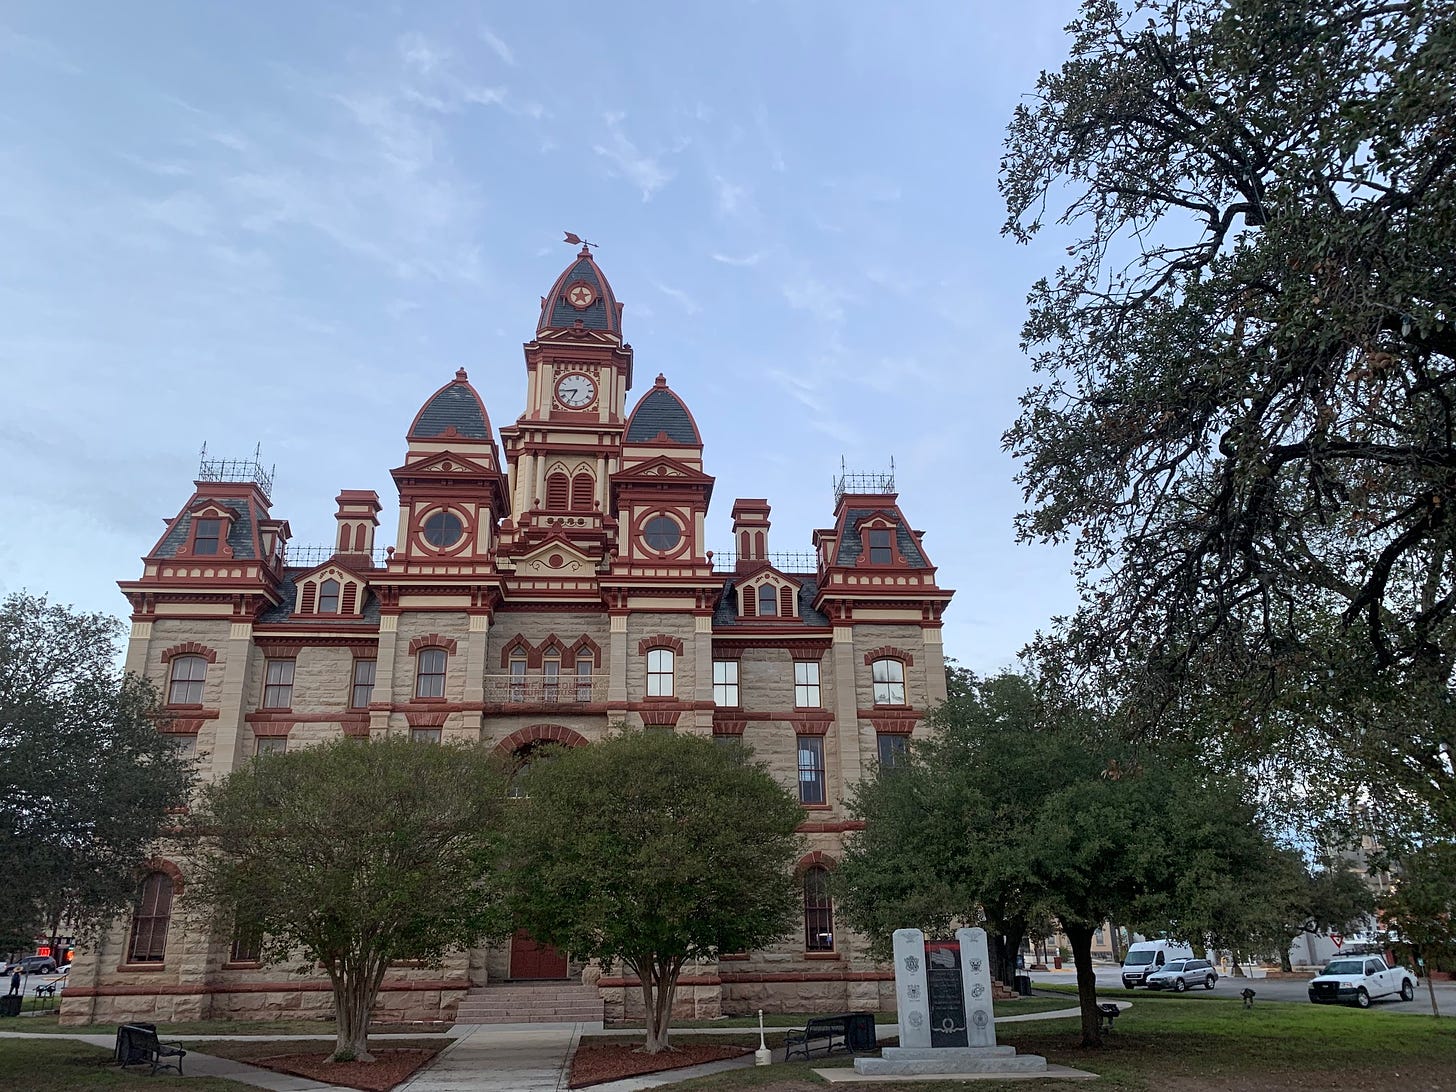 Caldwell County Courthouse, Lockhart, TX. Built in 1894 out of limestone.